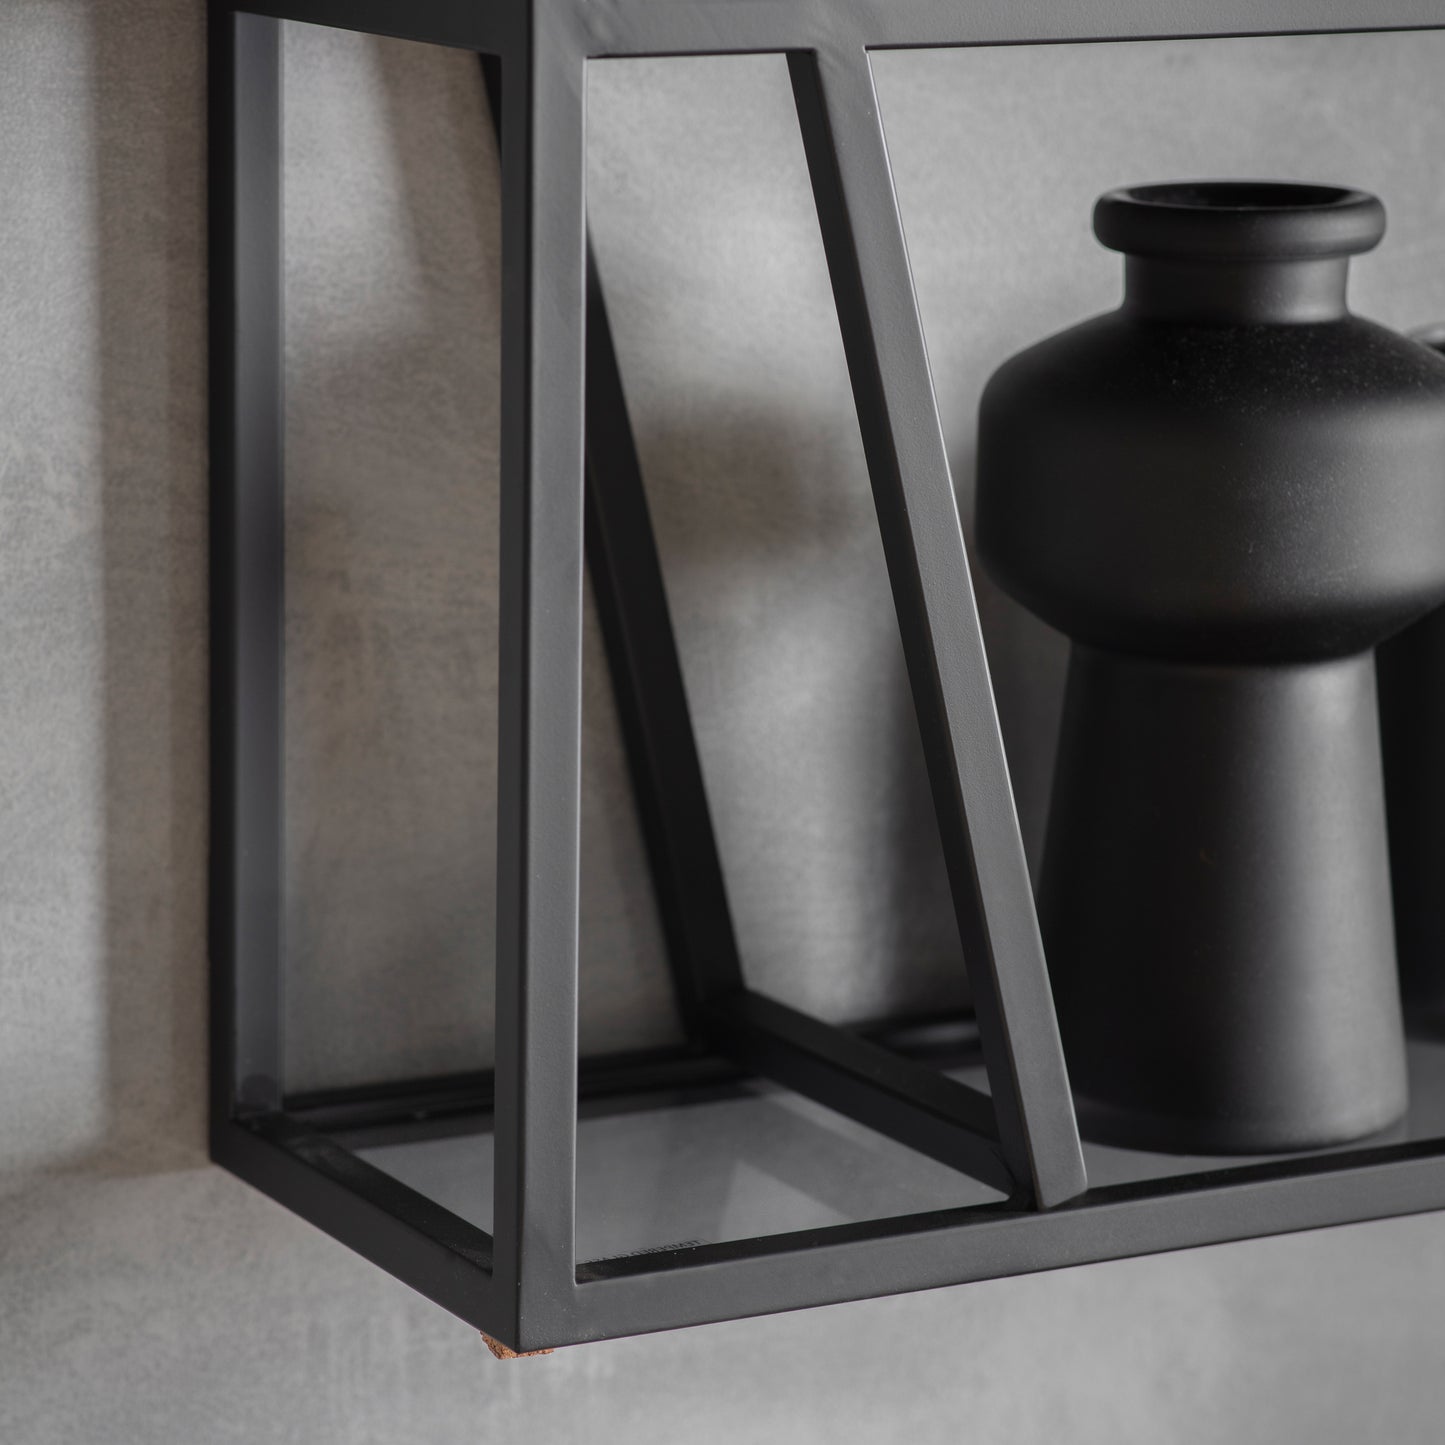 Load image into Gallery viewer, A Home furniture Putney Shelf Unit with vases on it from Kikiathome.co.uk.
